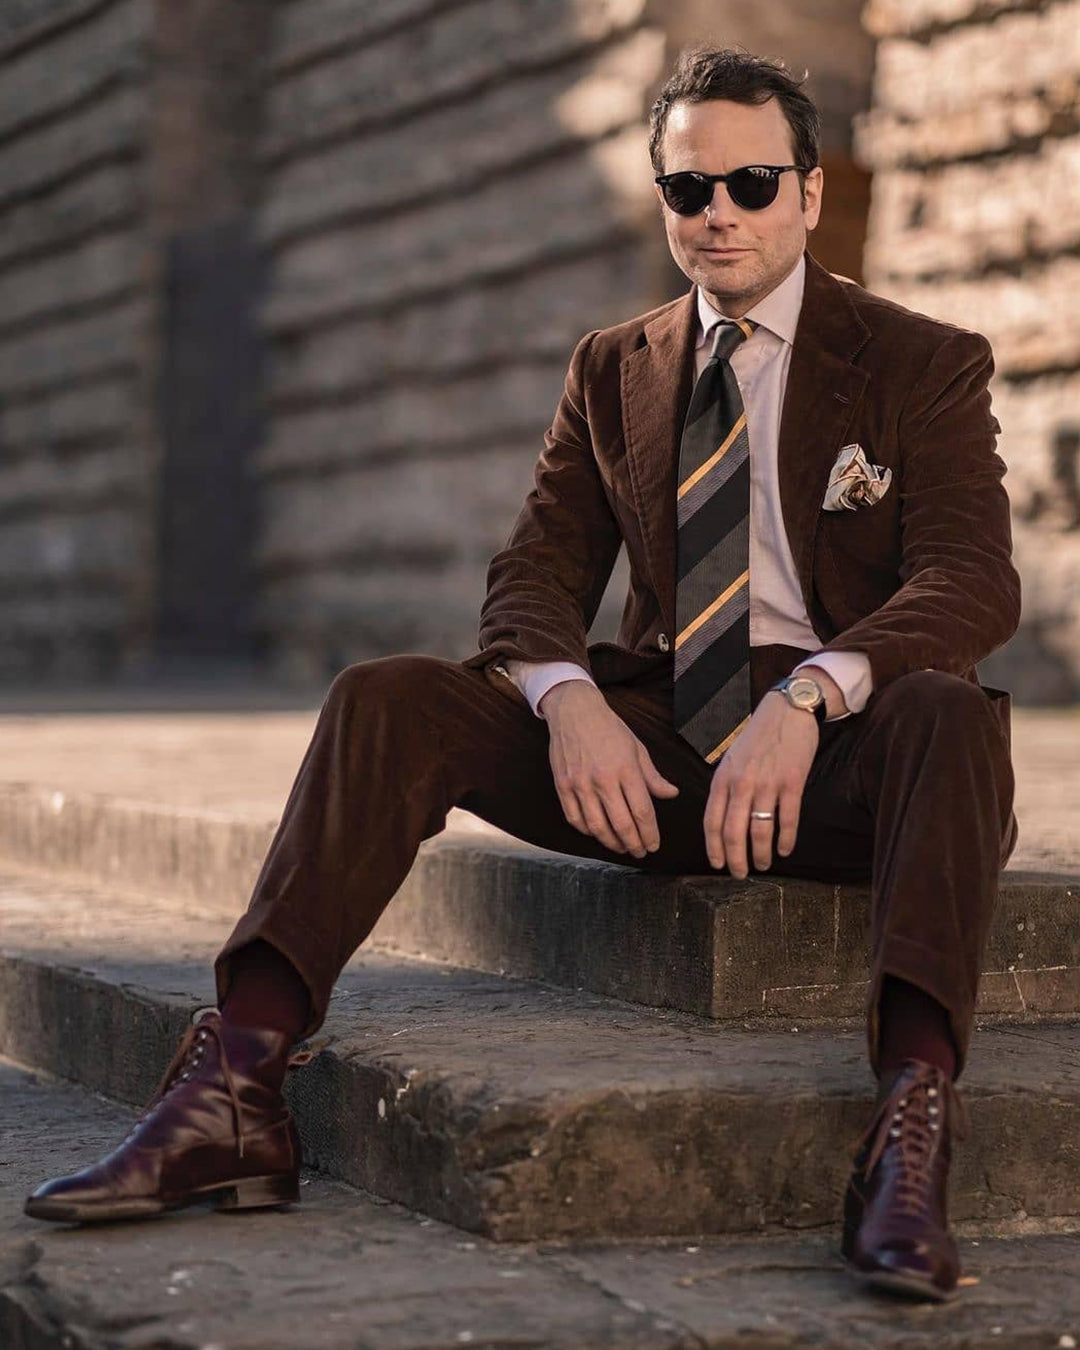 The Complete Guide to Men's Colour, Pattern and Texture Matching